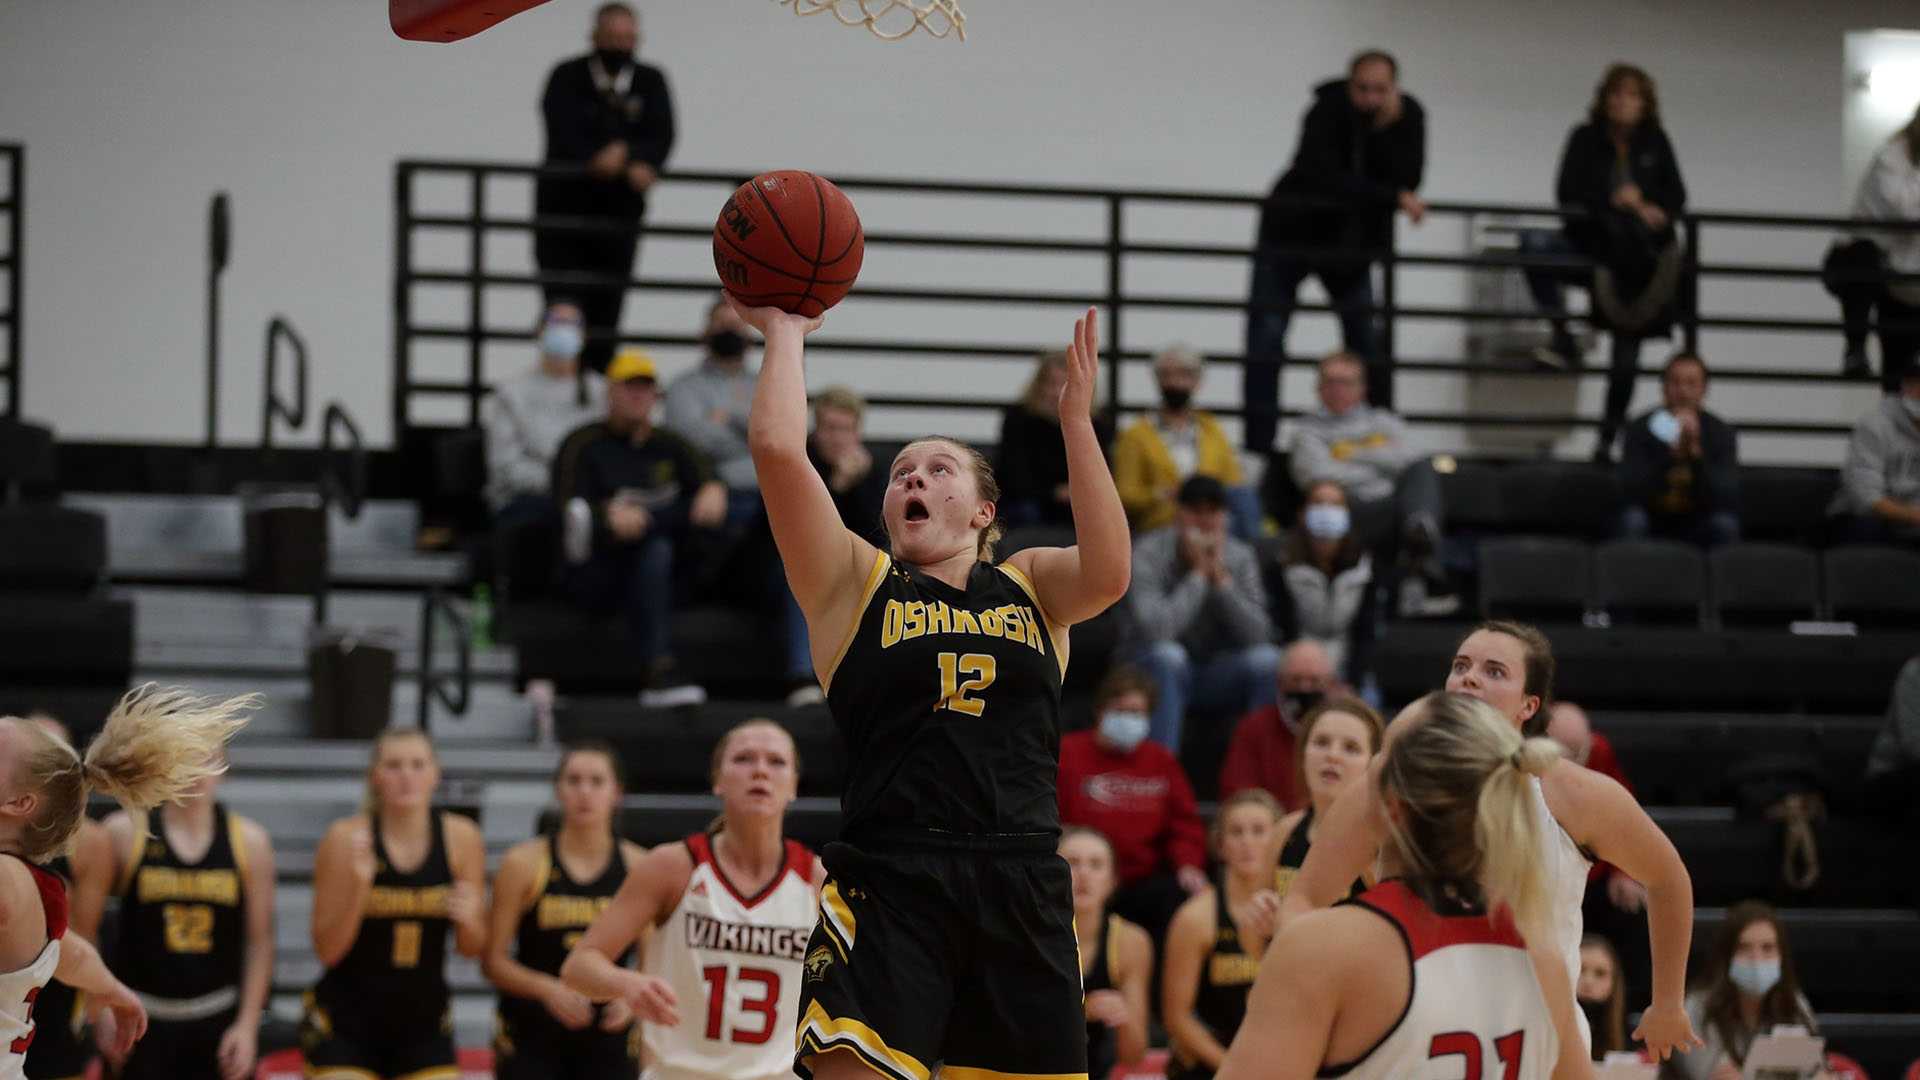 Leah Porath scored 28 points against the Vikings by making 10 of 20 shots from the field and all five free throws.